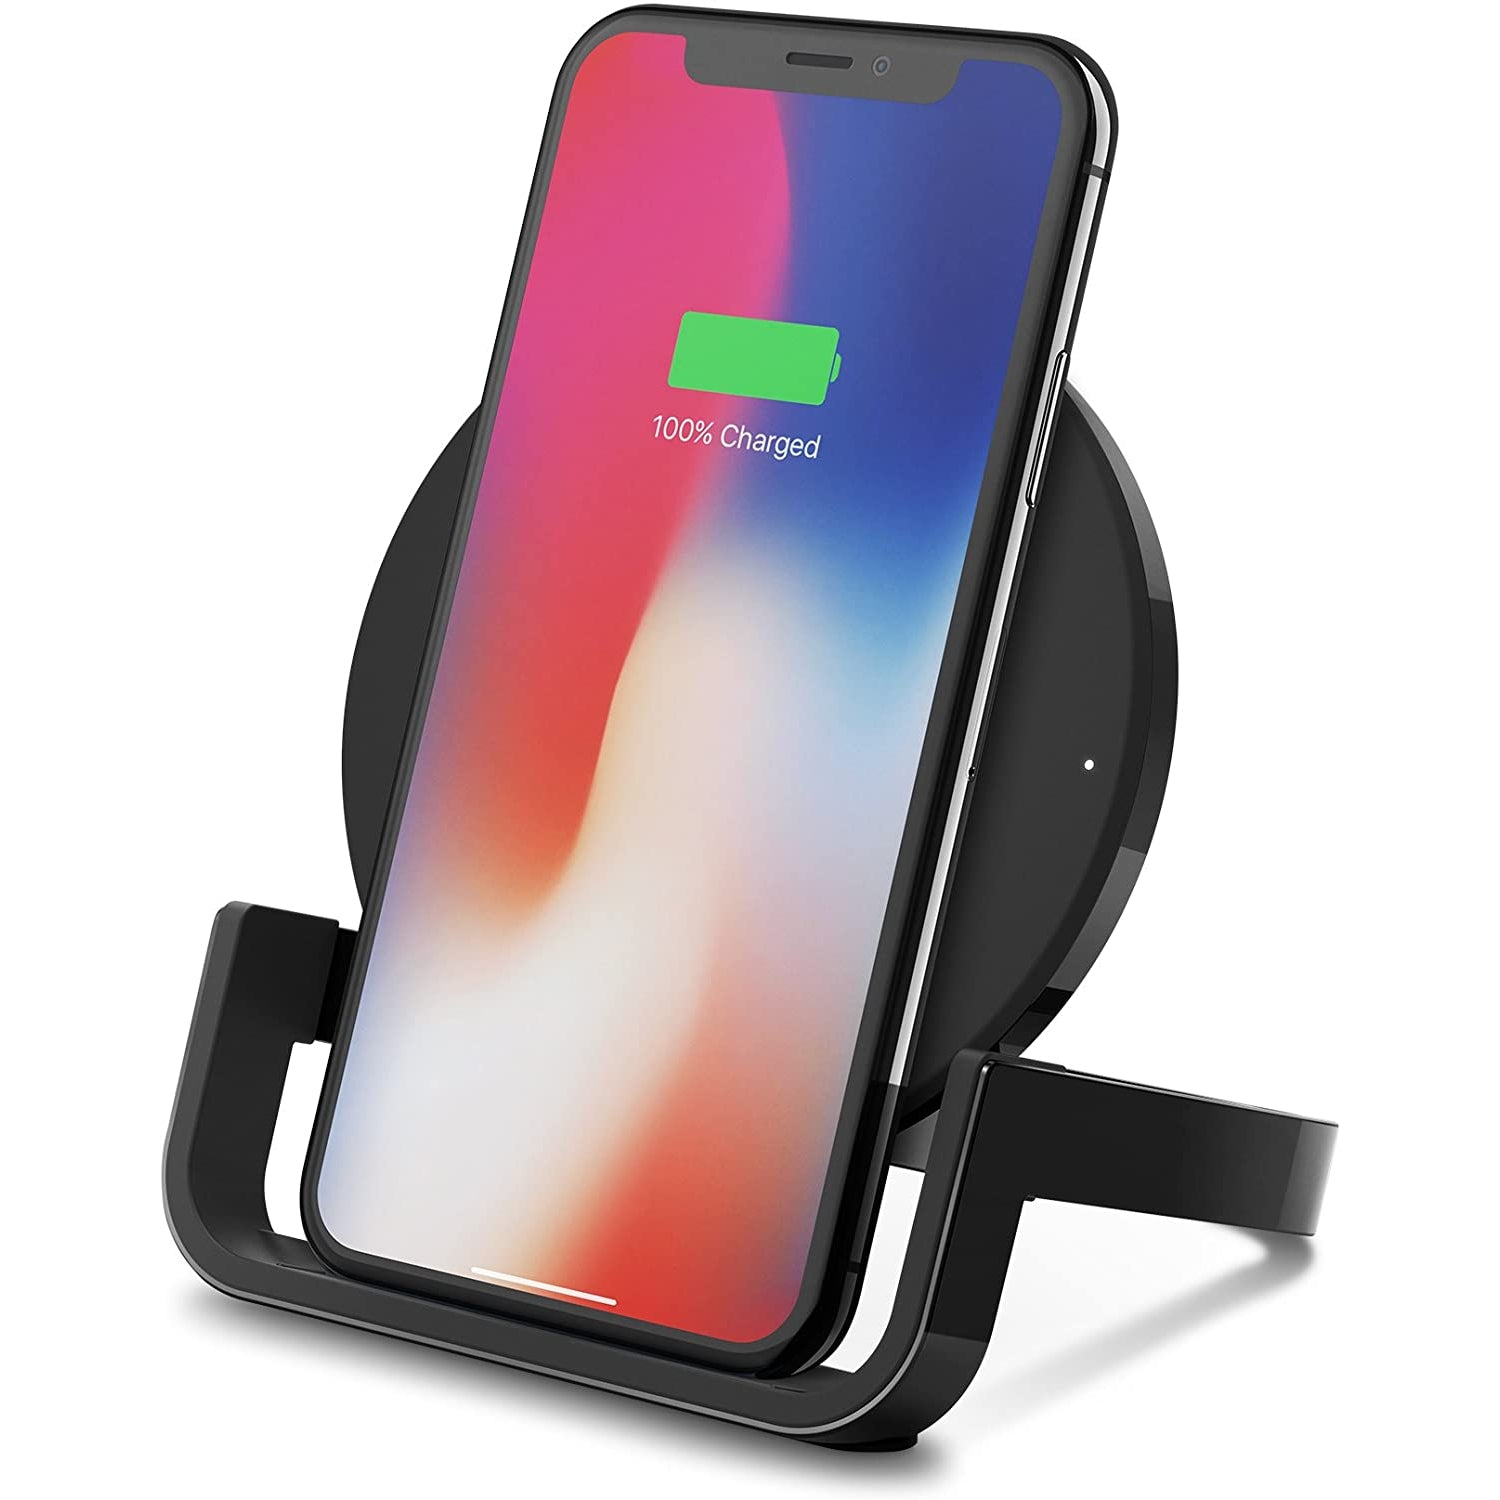 Belkin Boost Up Wireless Charging Stand 10W - Black - Refurbished: Good Condition